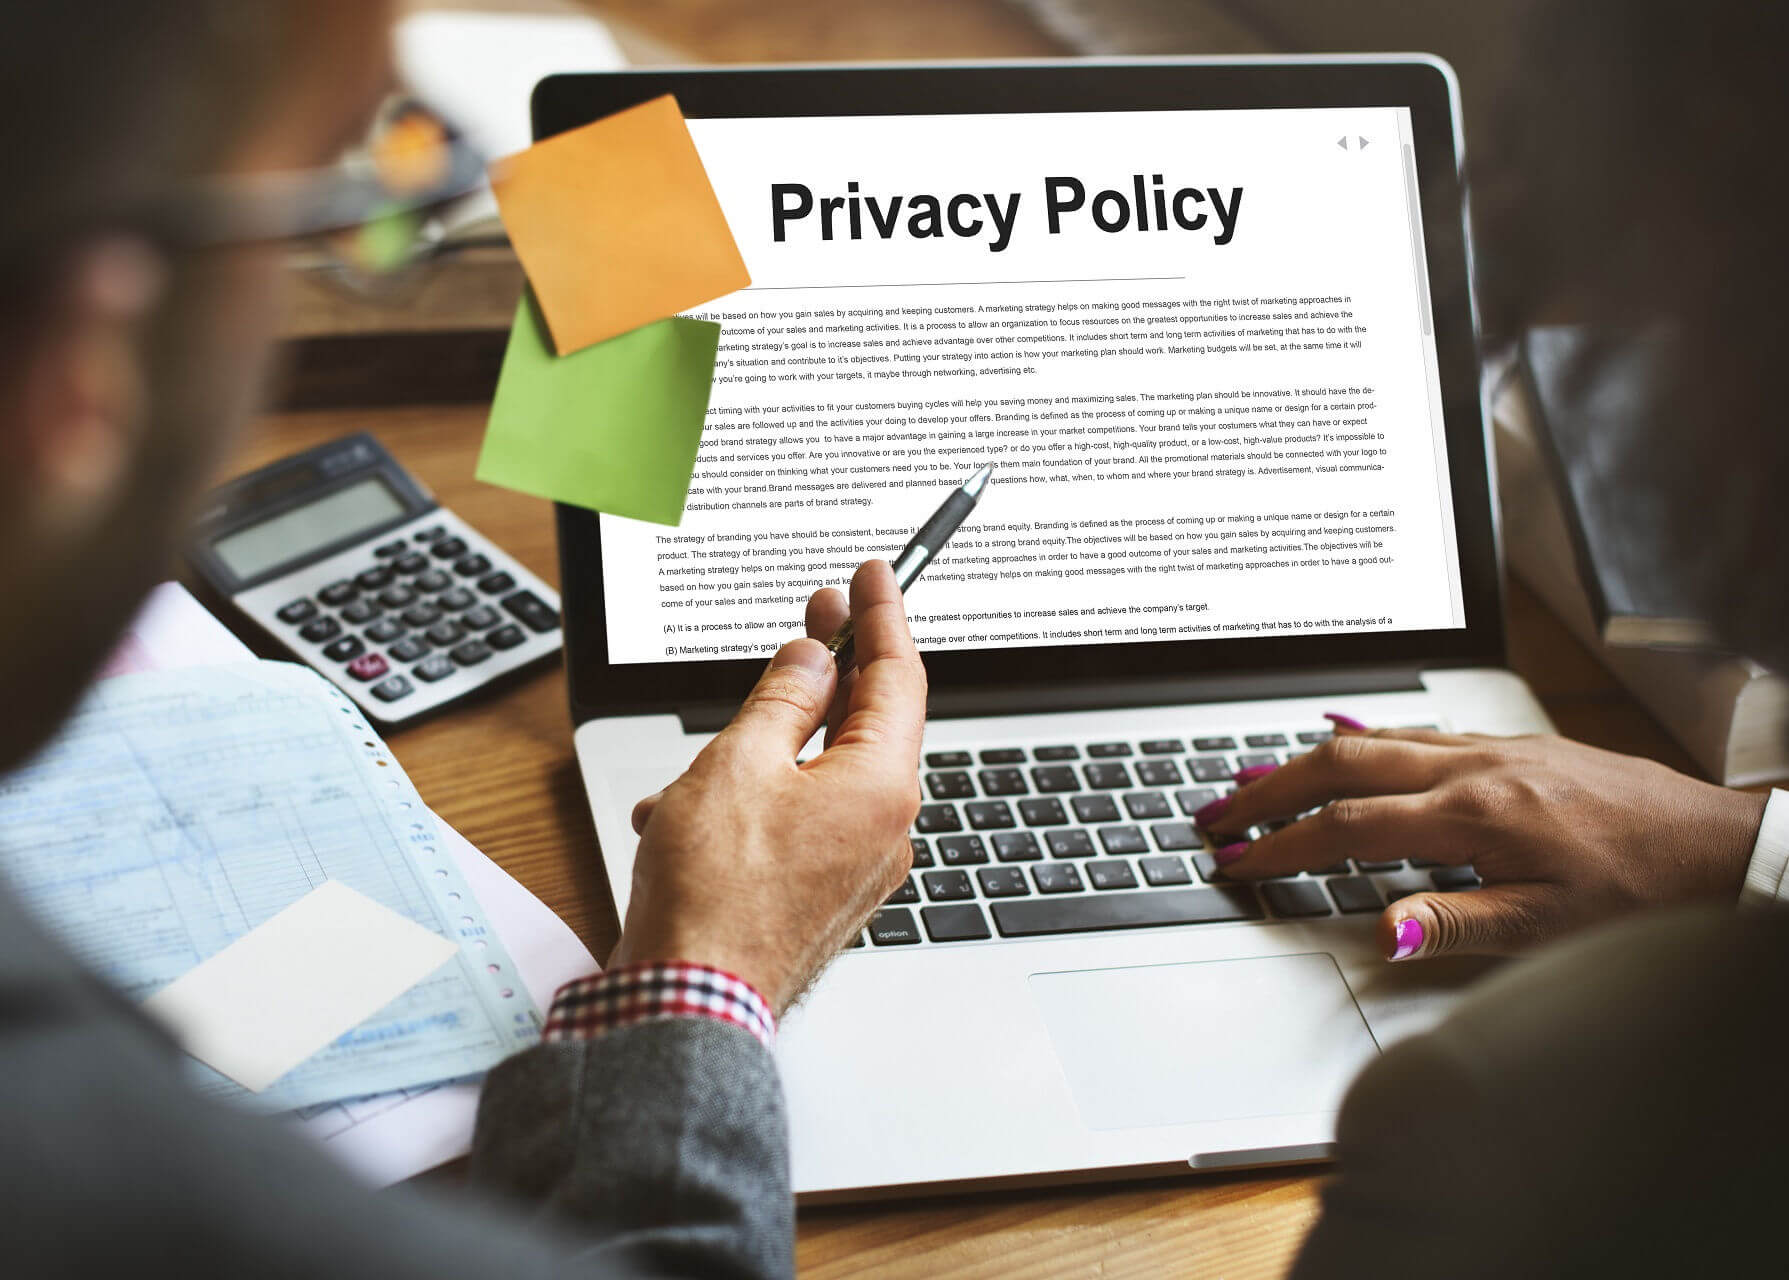 Windows 10 privacy issues: What you need to know?